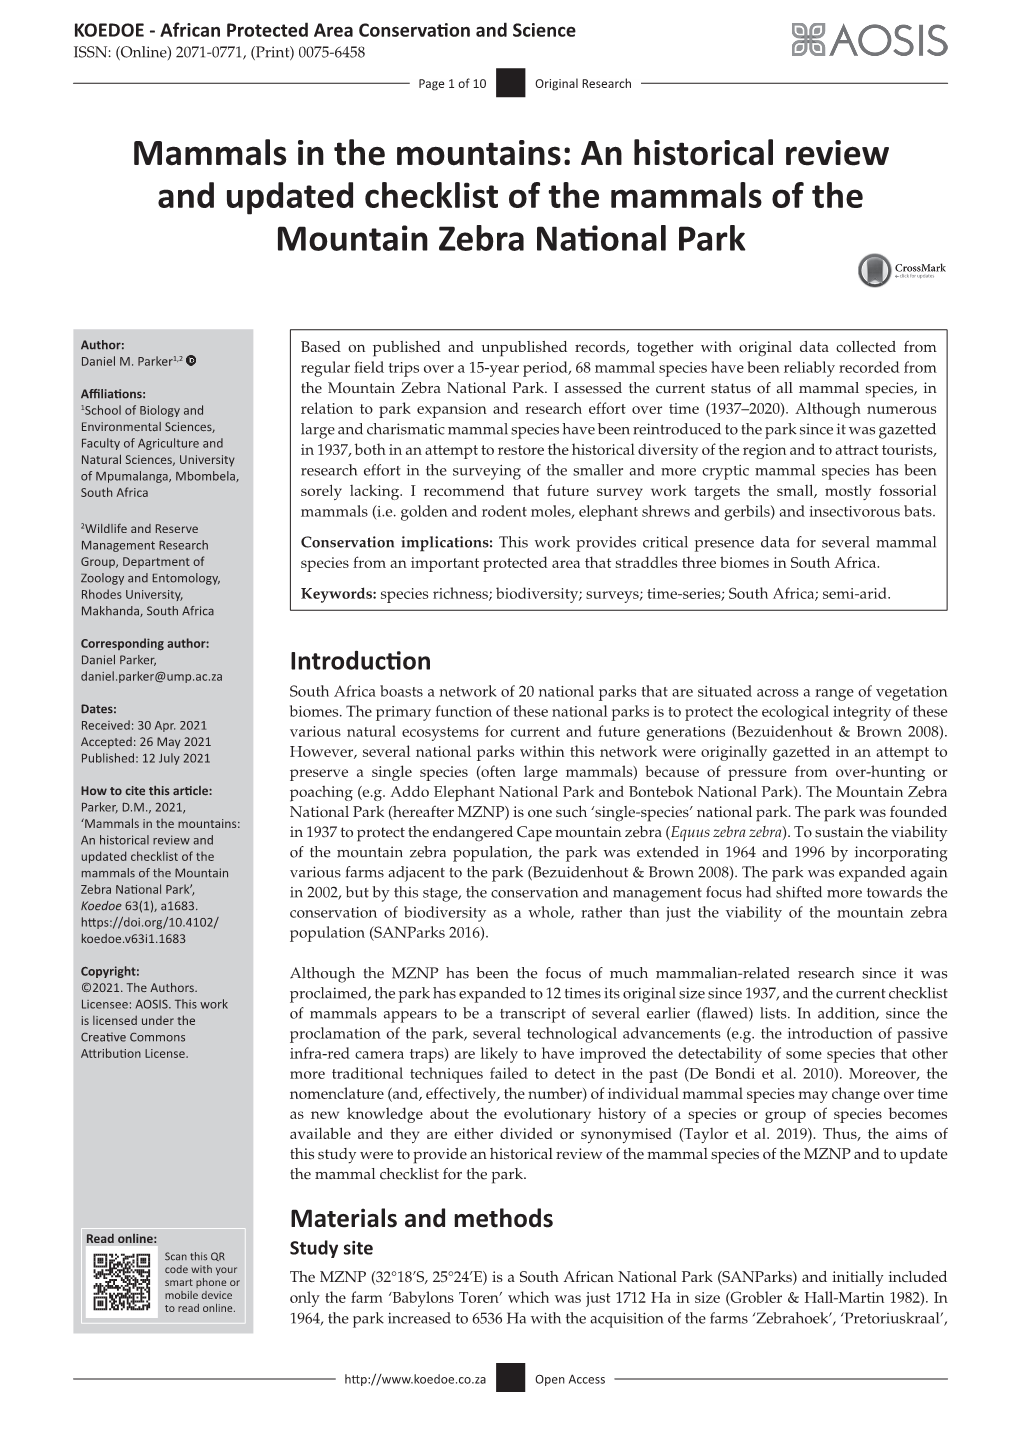 An Historical Review and Updated Checklist of the Mammals of the Mountain Zebra National Park